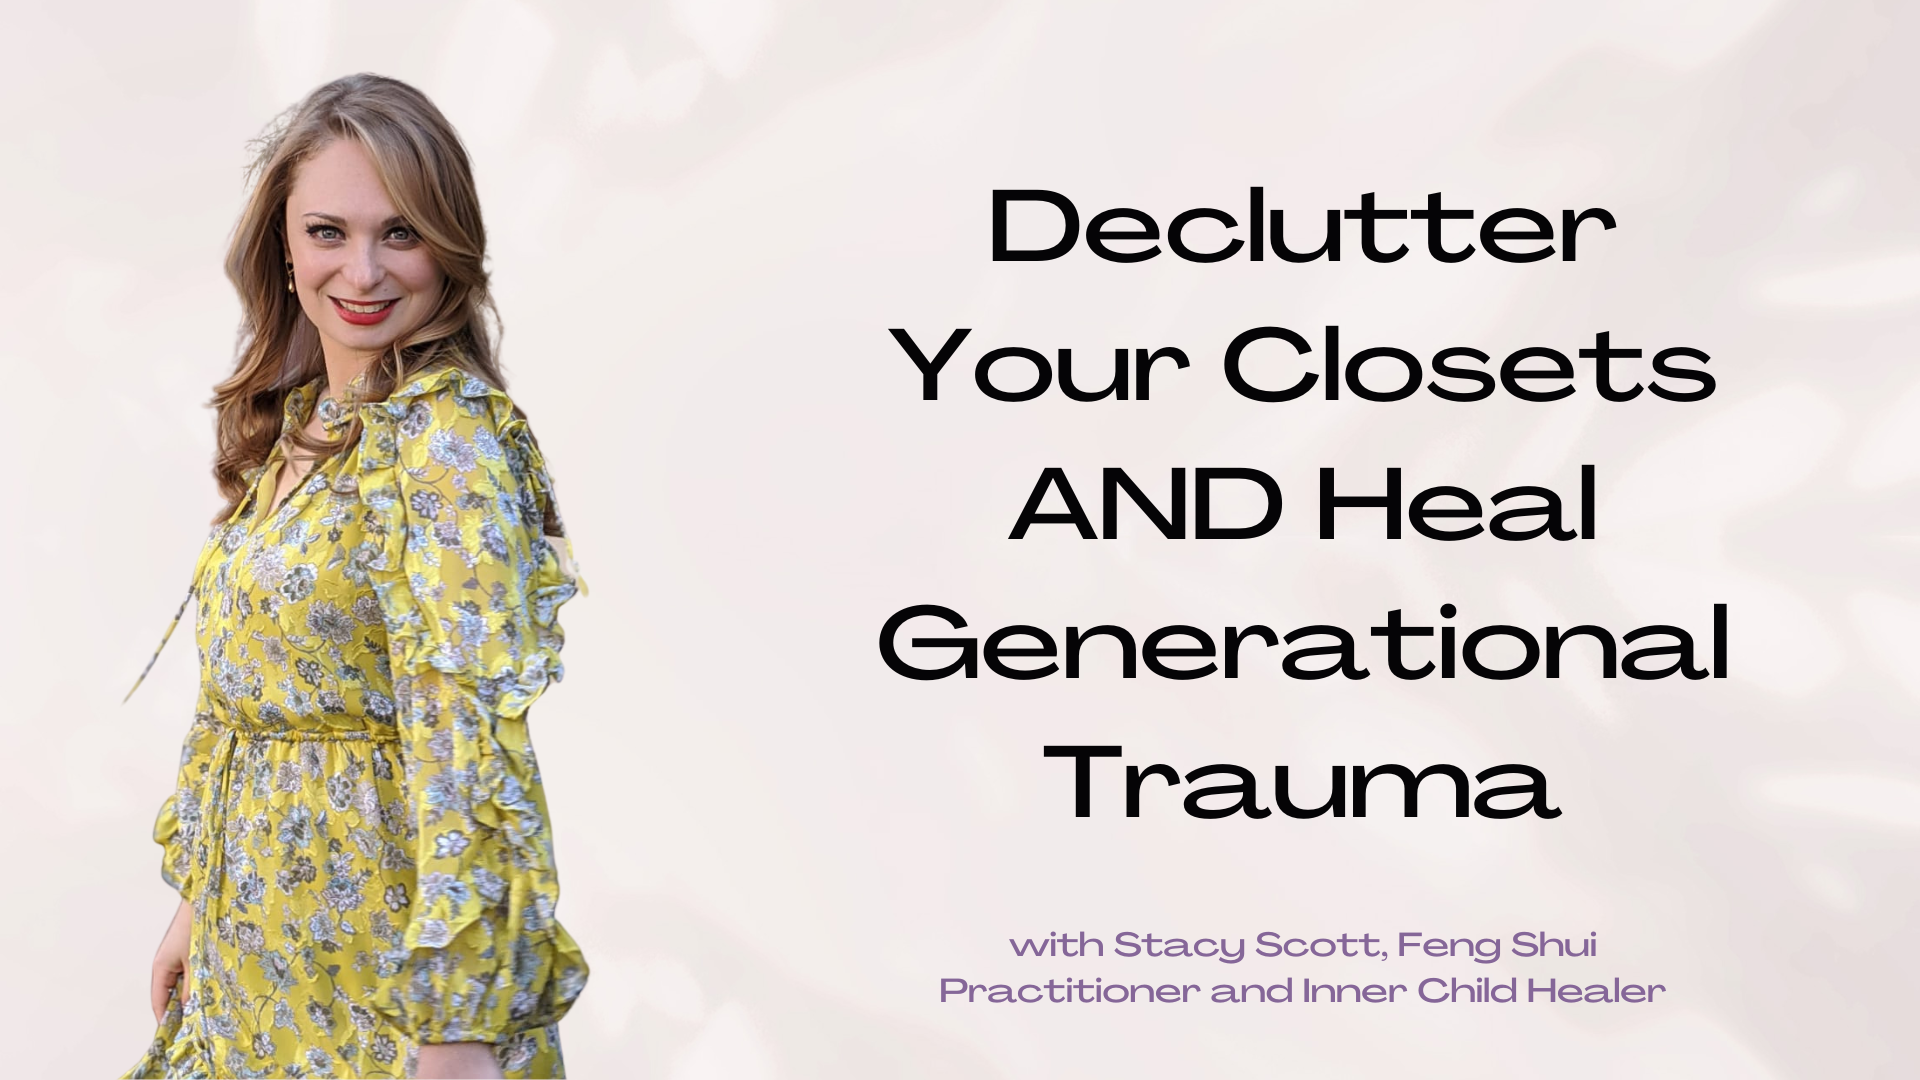 Declutter Your Closets AND Heal Generational Trauma